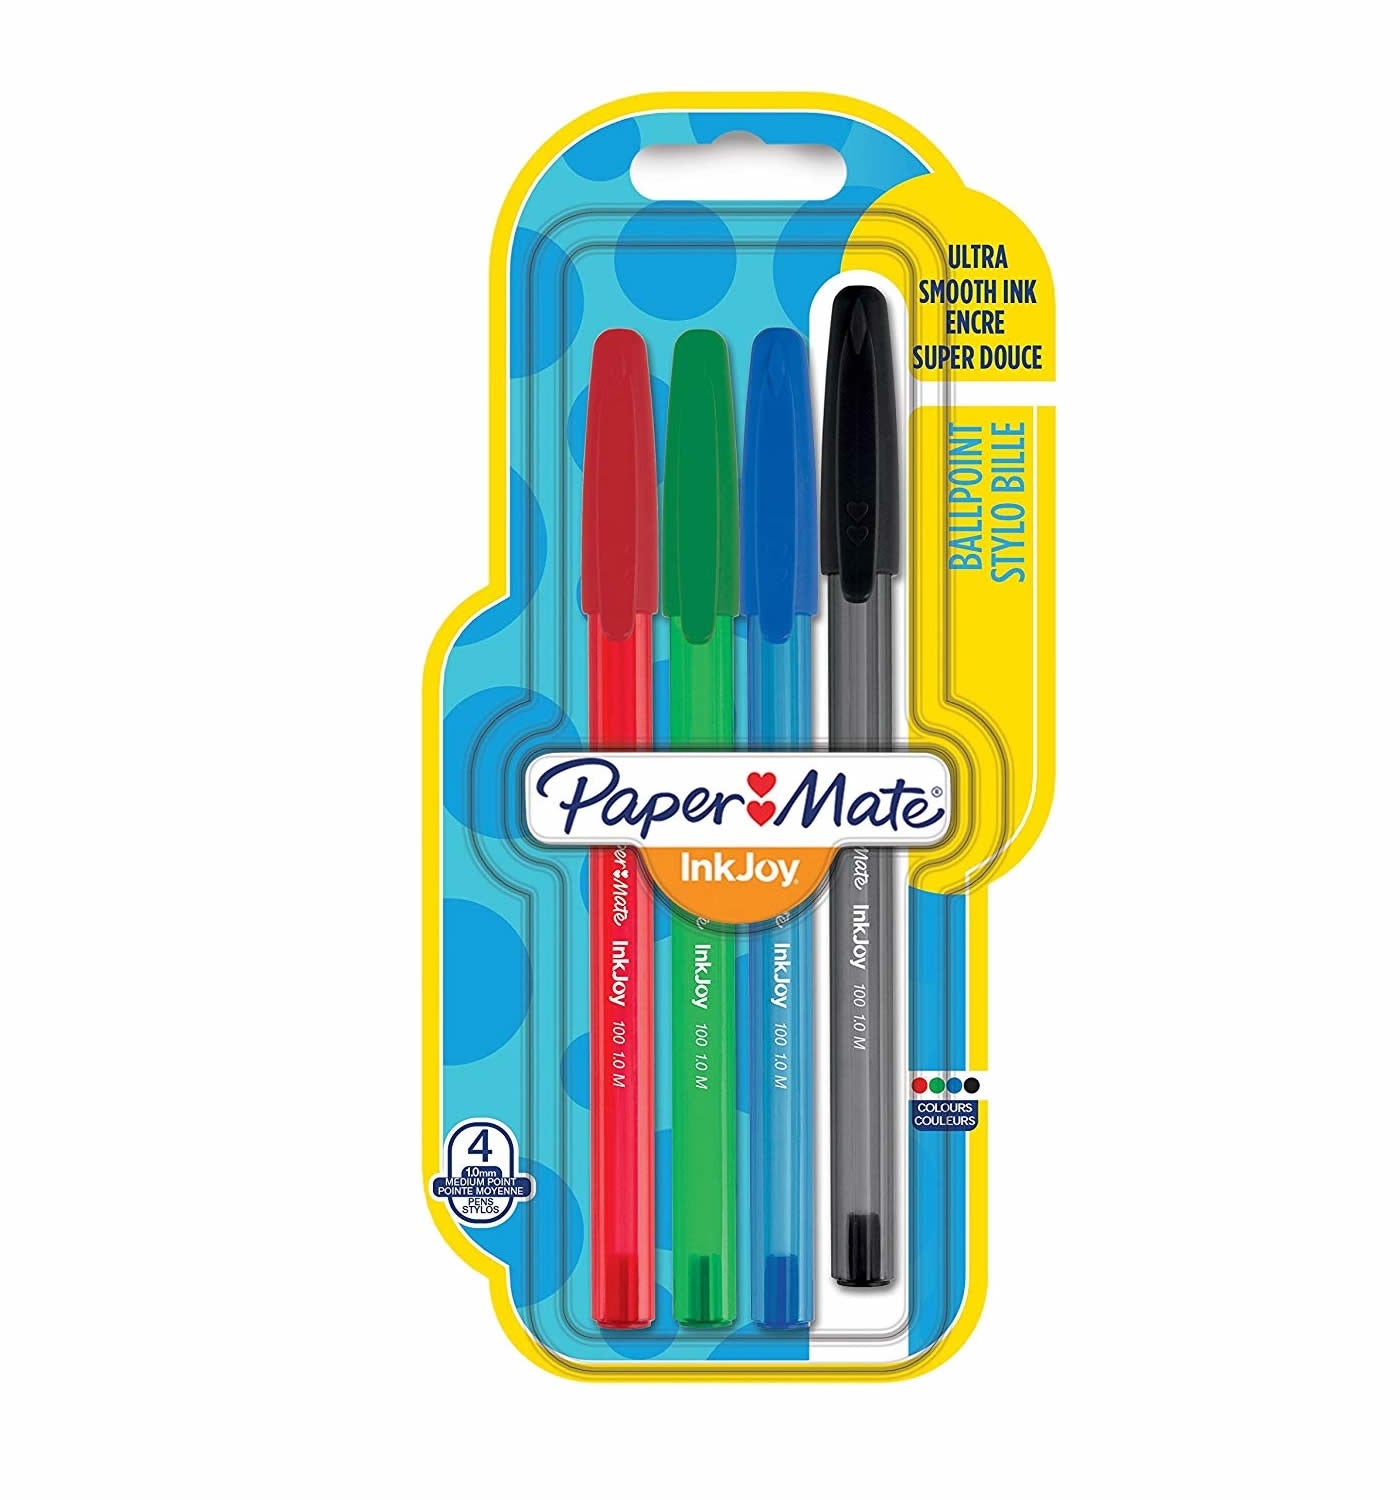 Paper Mate InkJoy 100 CAP Capped Ballpoint Pen Medium Assorted Standard Colours - Pack of 4